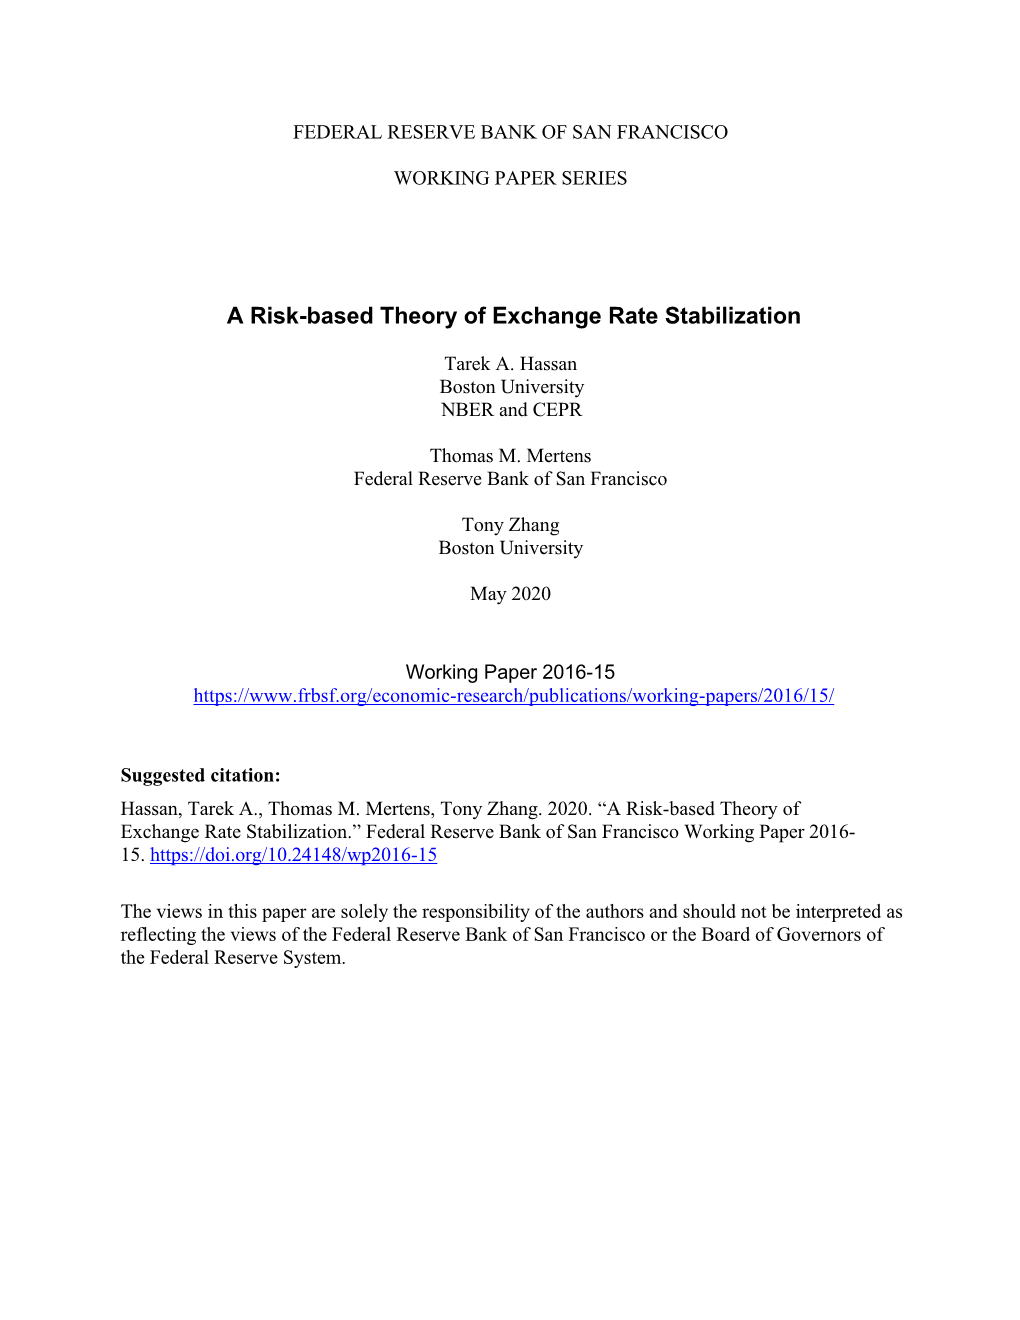 A Risk-Based Theory of Exchange Rate Stabilization